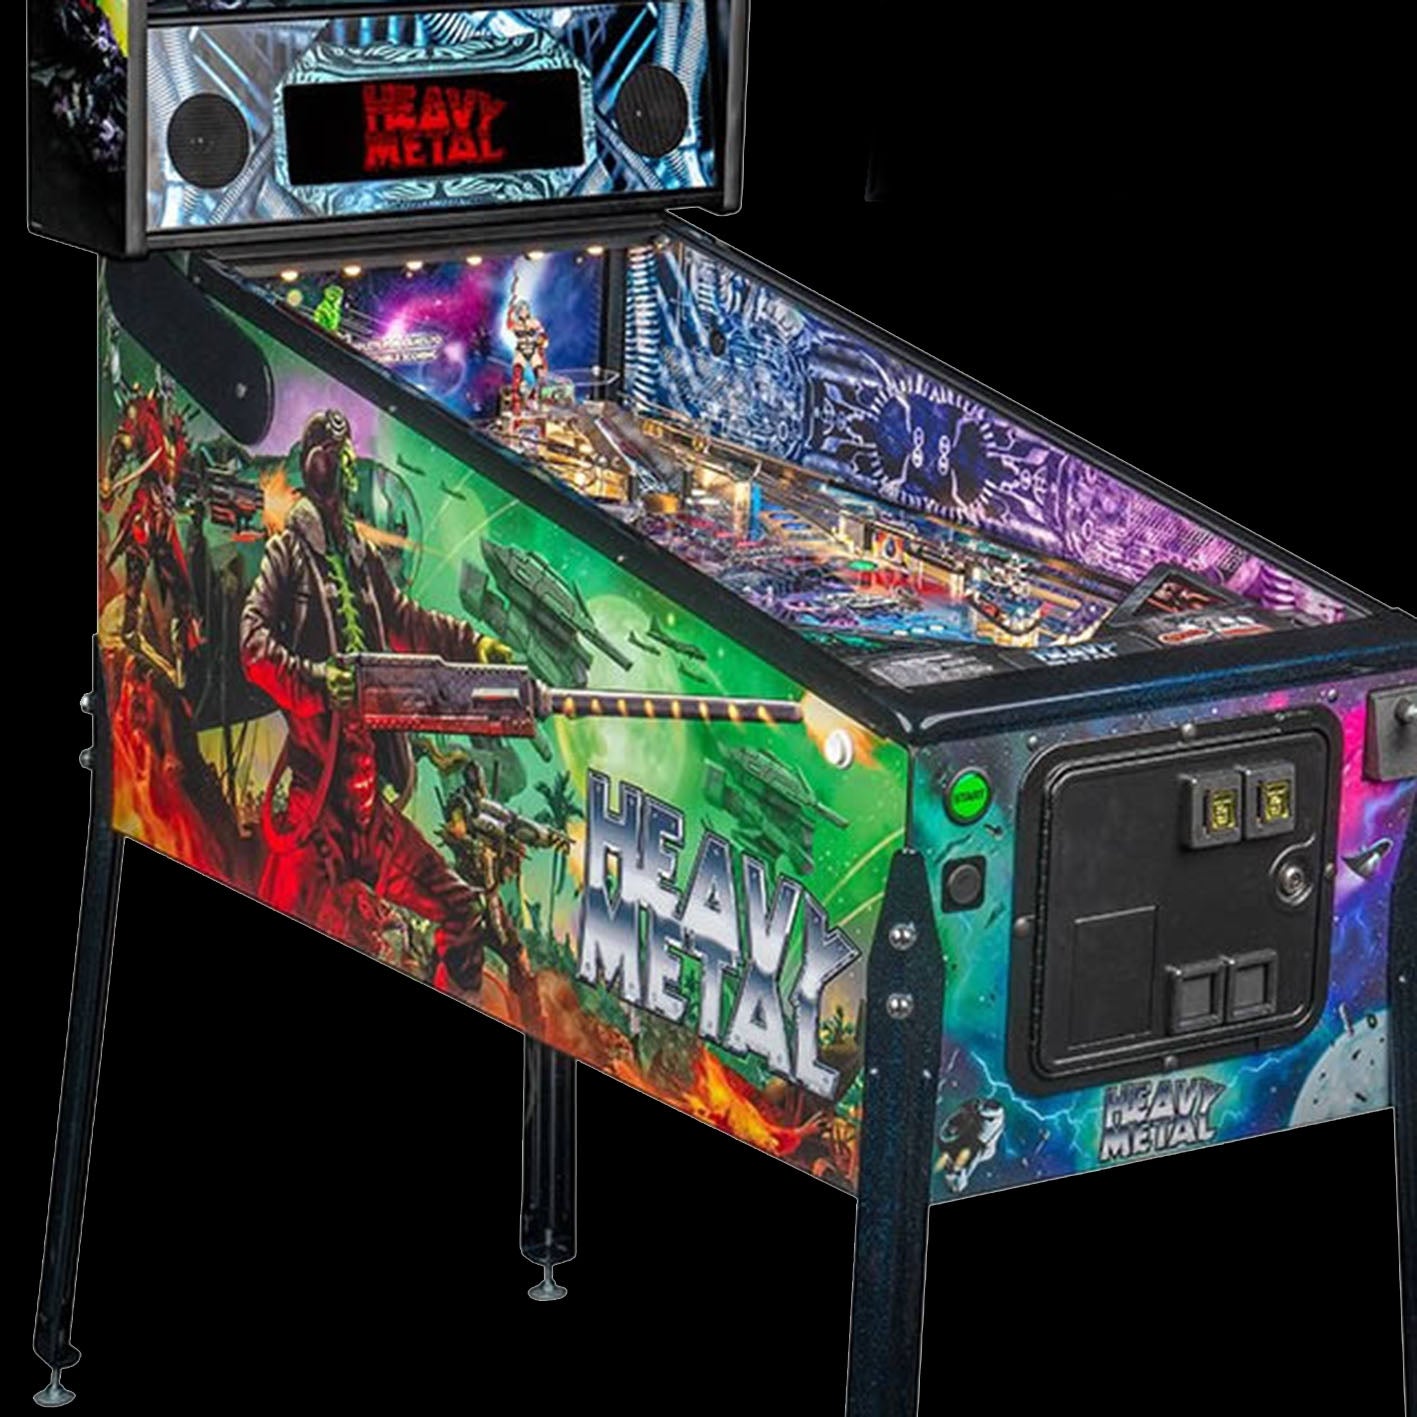 2020 Heavy Metal Limited Edition Pinball Machine by Stern